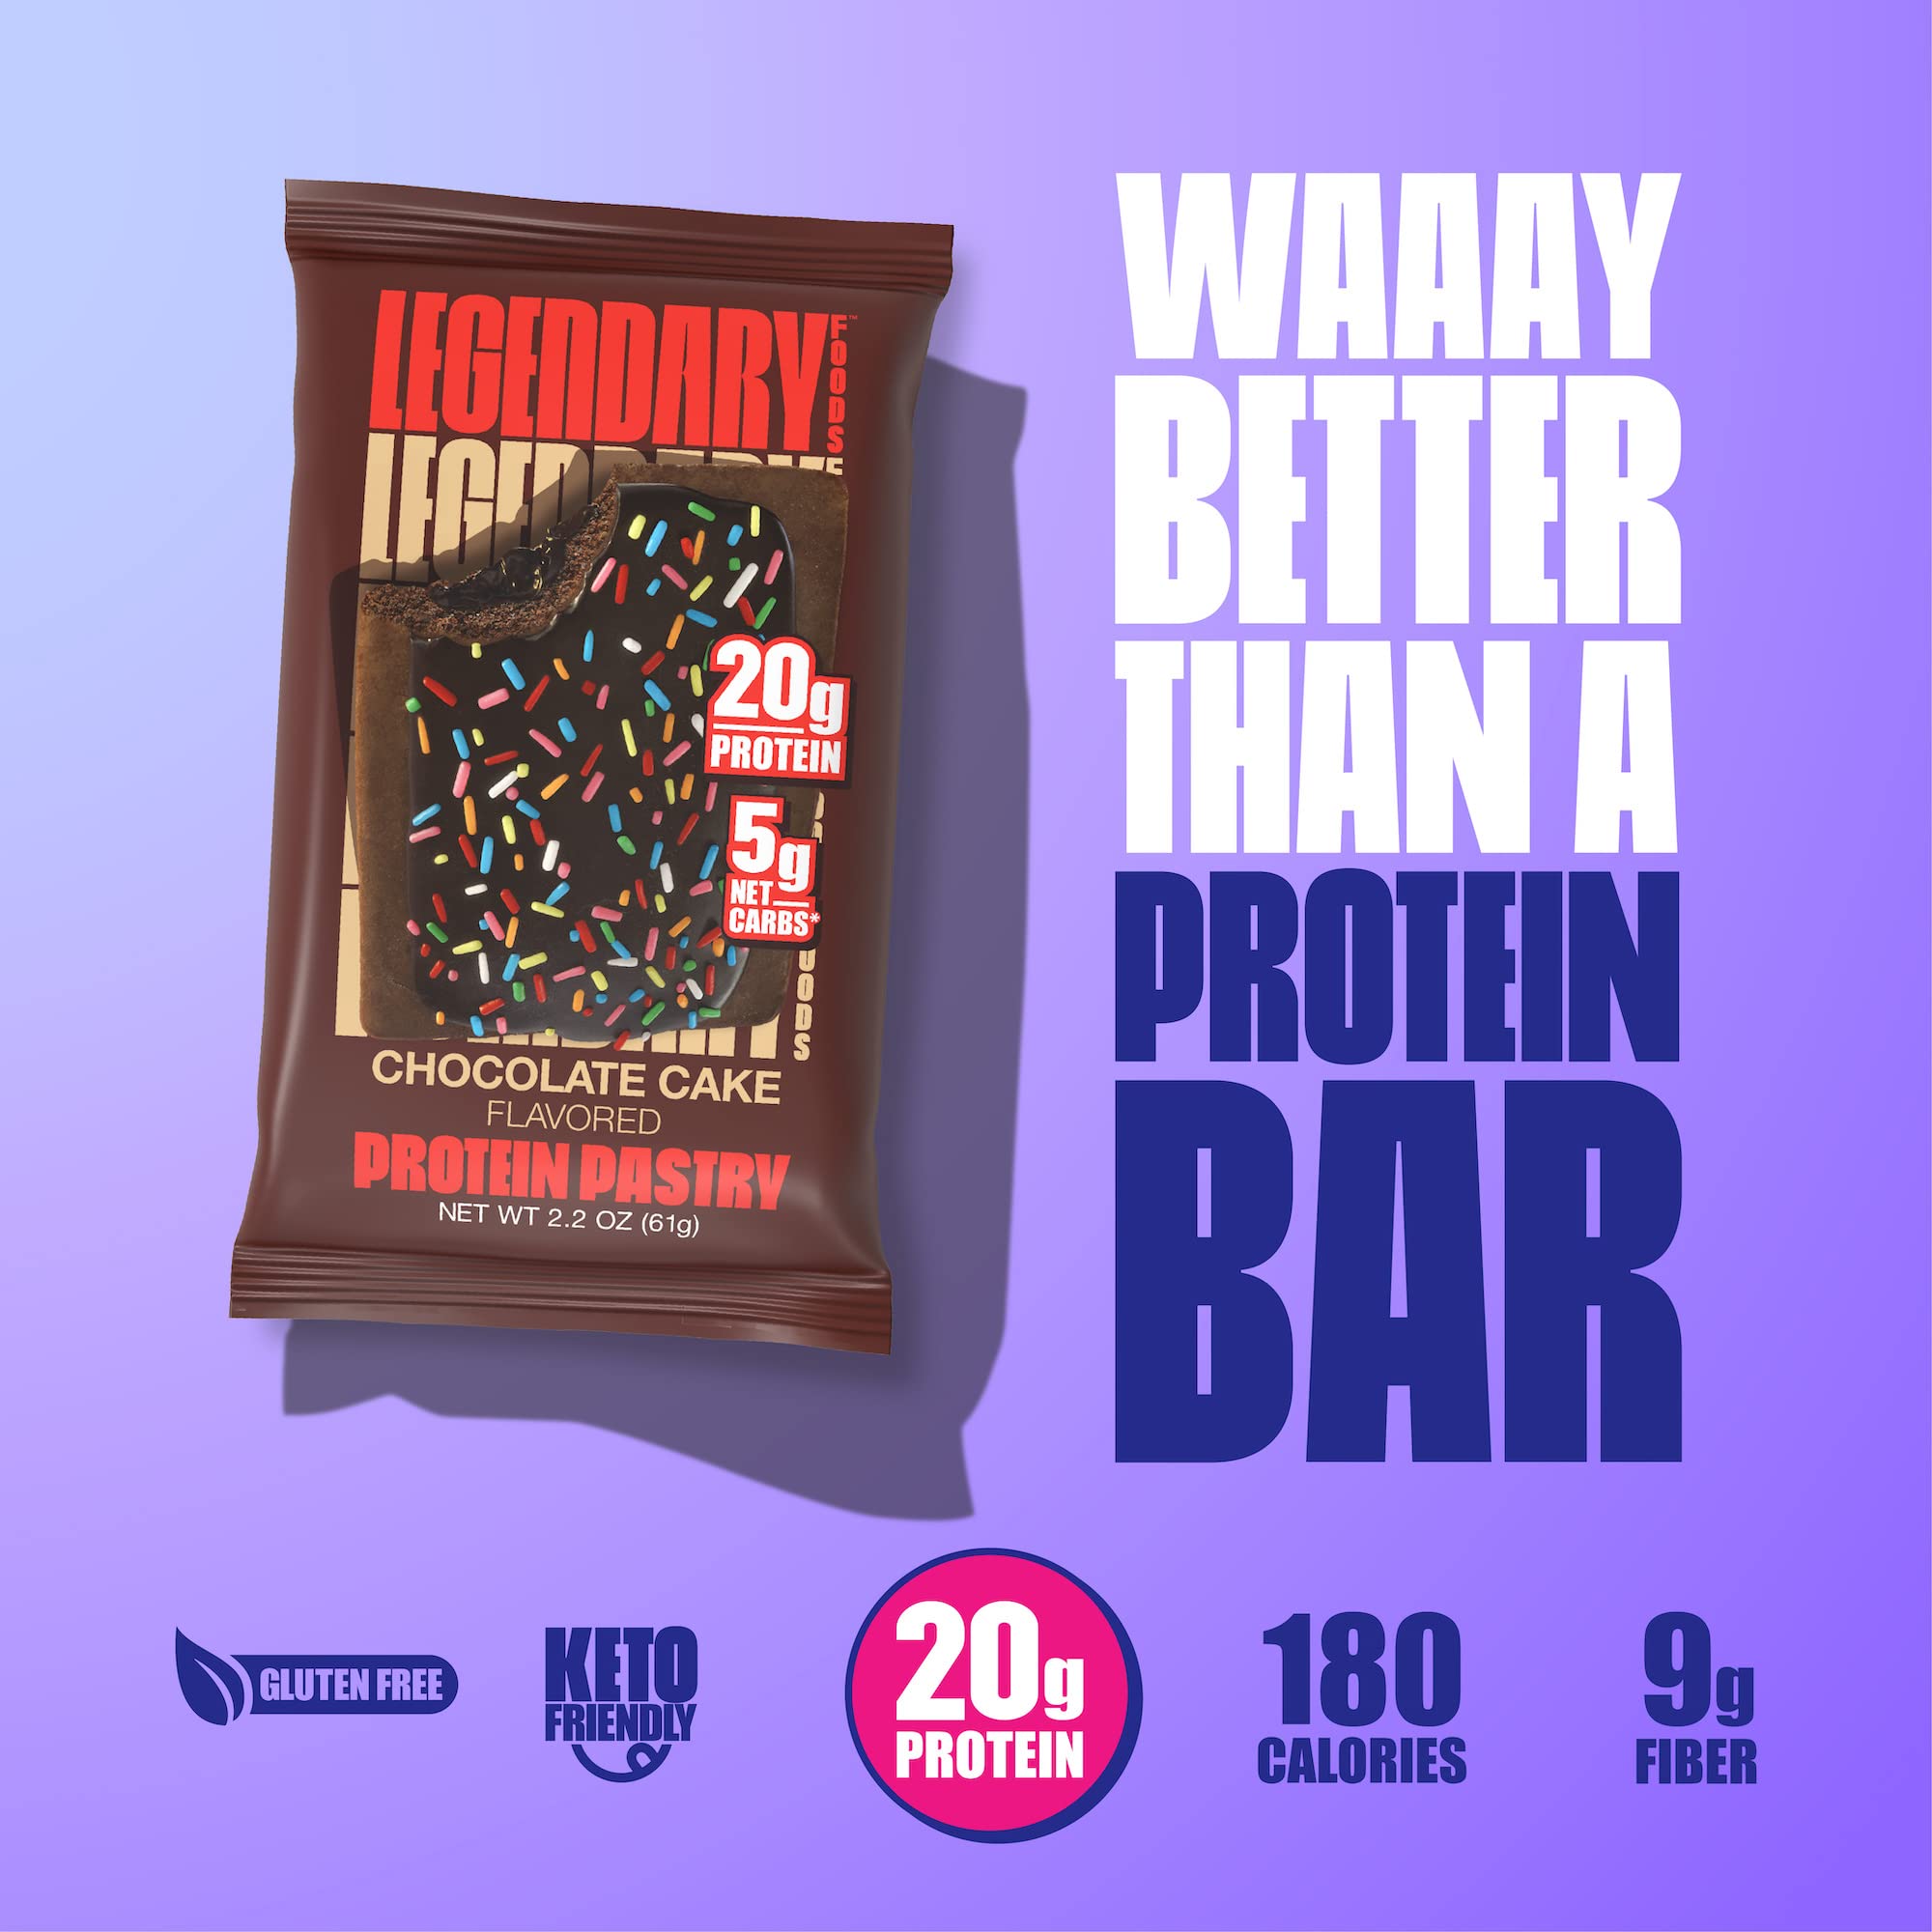 Legendary Foods 20 gr Protein Pastry | Low Carb, Tasty Protein Bar Alternative | Keto Friendly | No Sugar Added | High Protein Breakfast Snacks | Gluten Free Keto Food - Chocolate Cake (8-Pack)